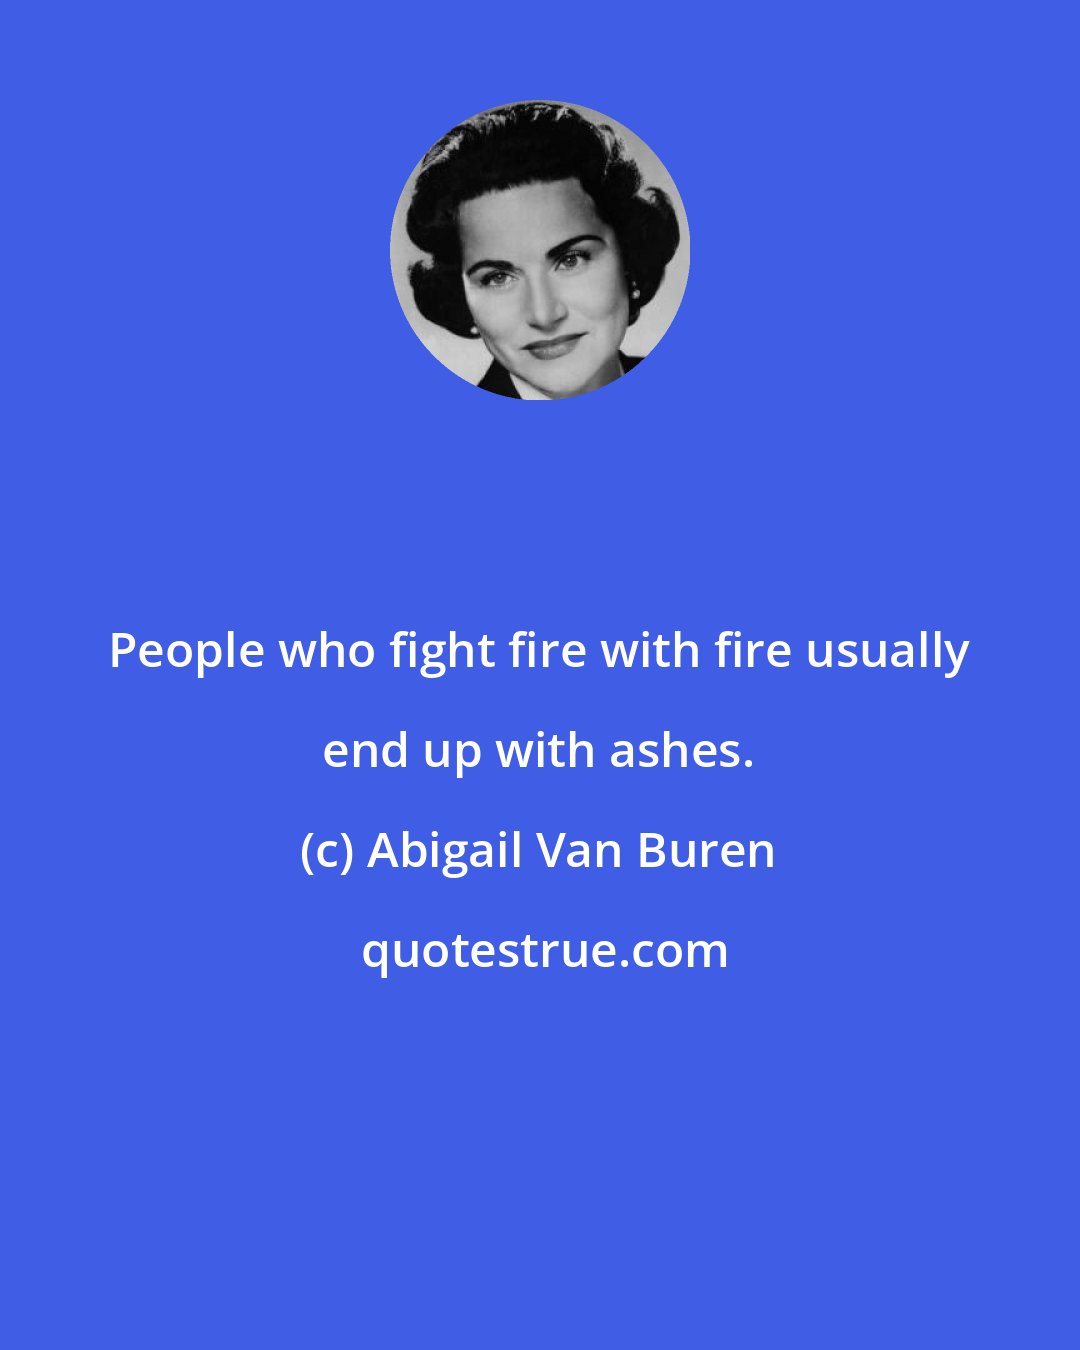 Abigail Van Buren: People who fight fire with fire usually end up with ashes.